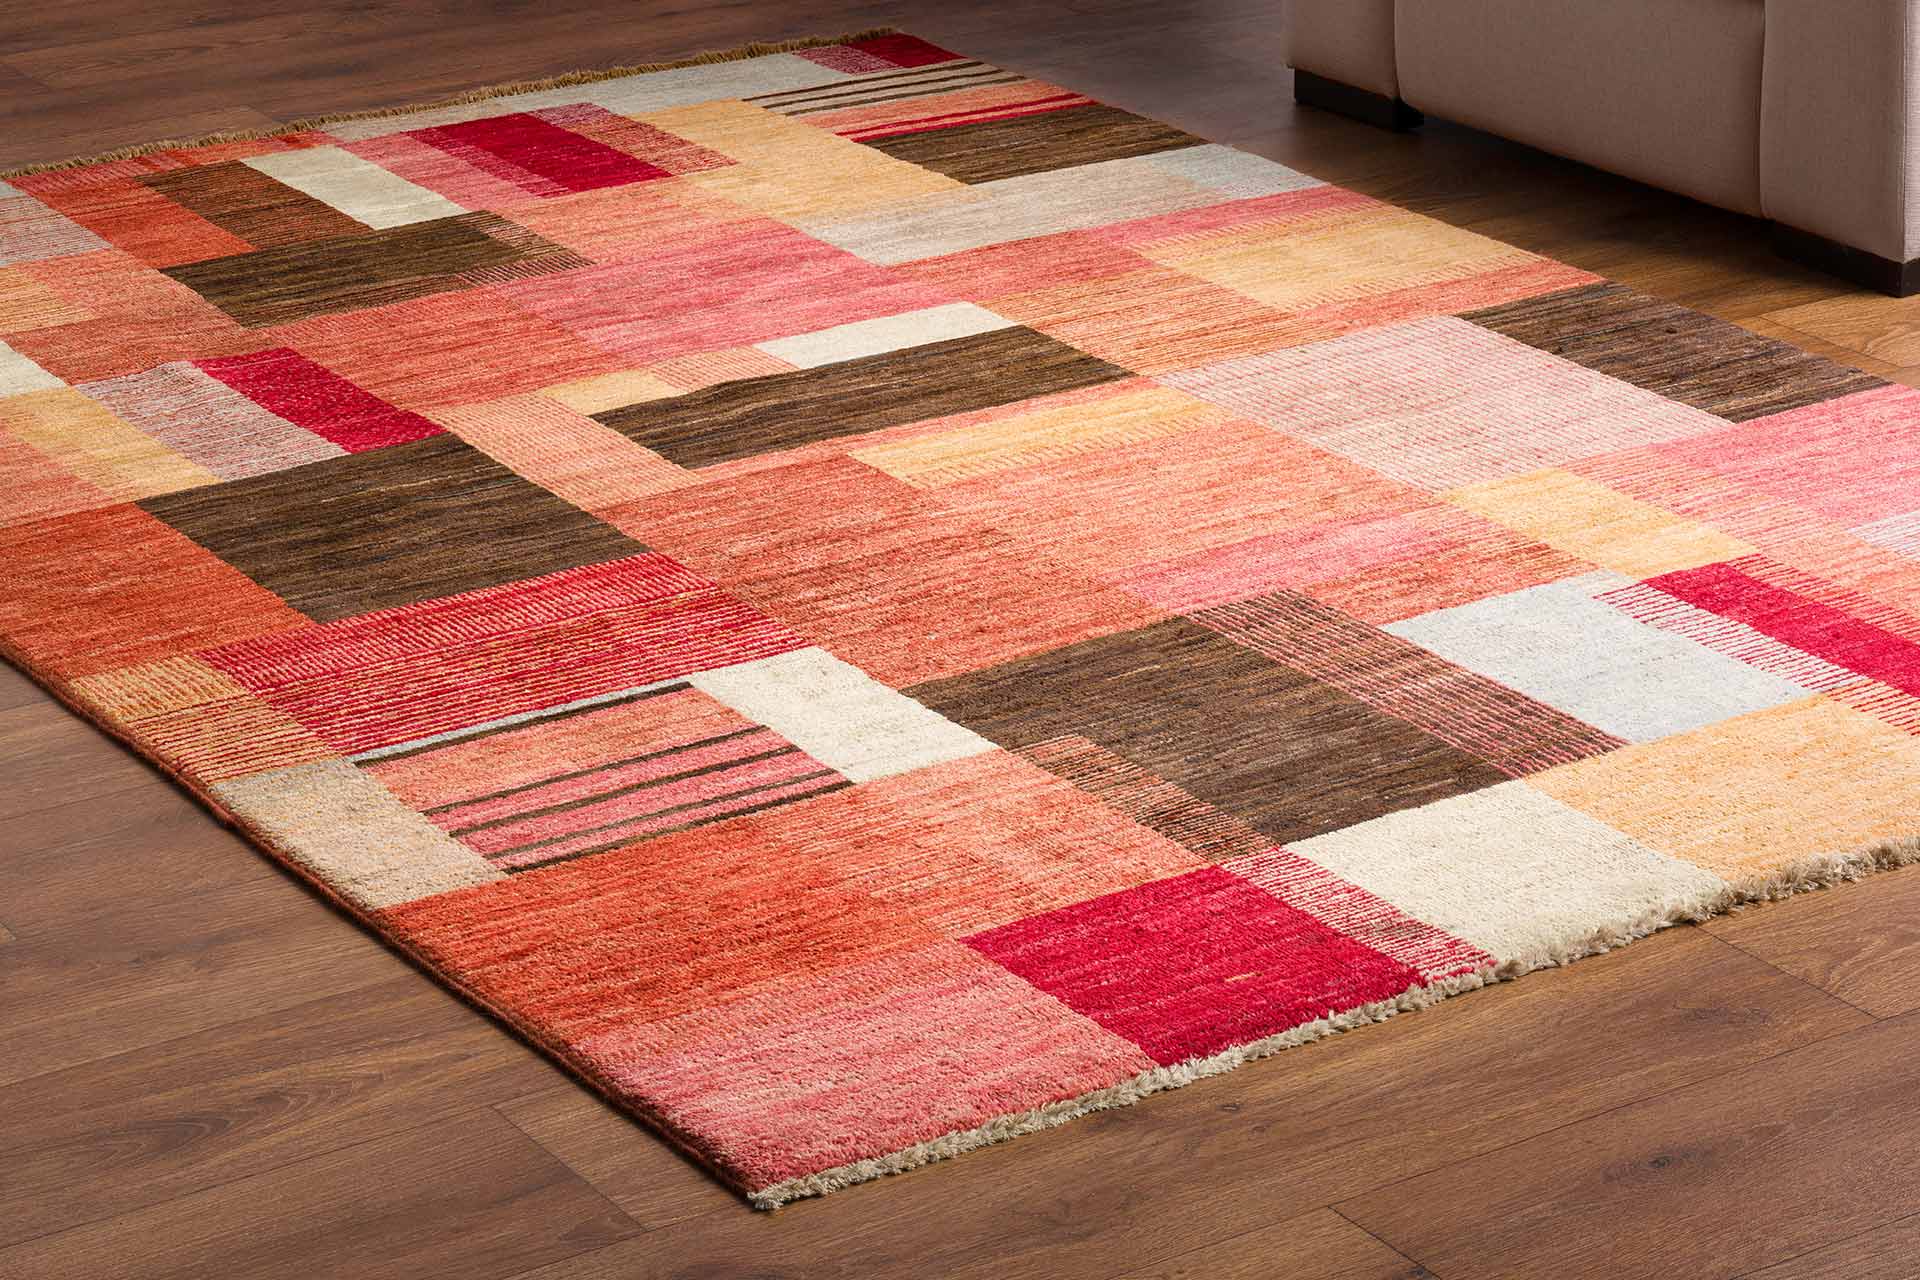 Rugs For Sale in Oldham | Buy Rugs Online | Lifestyle Carpets